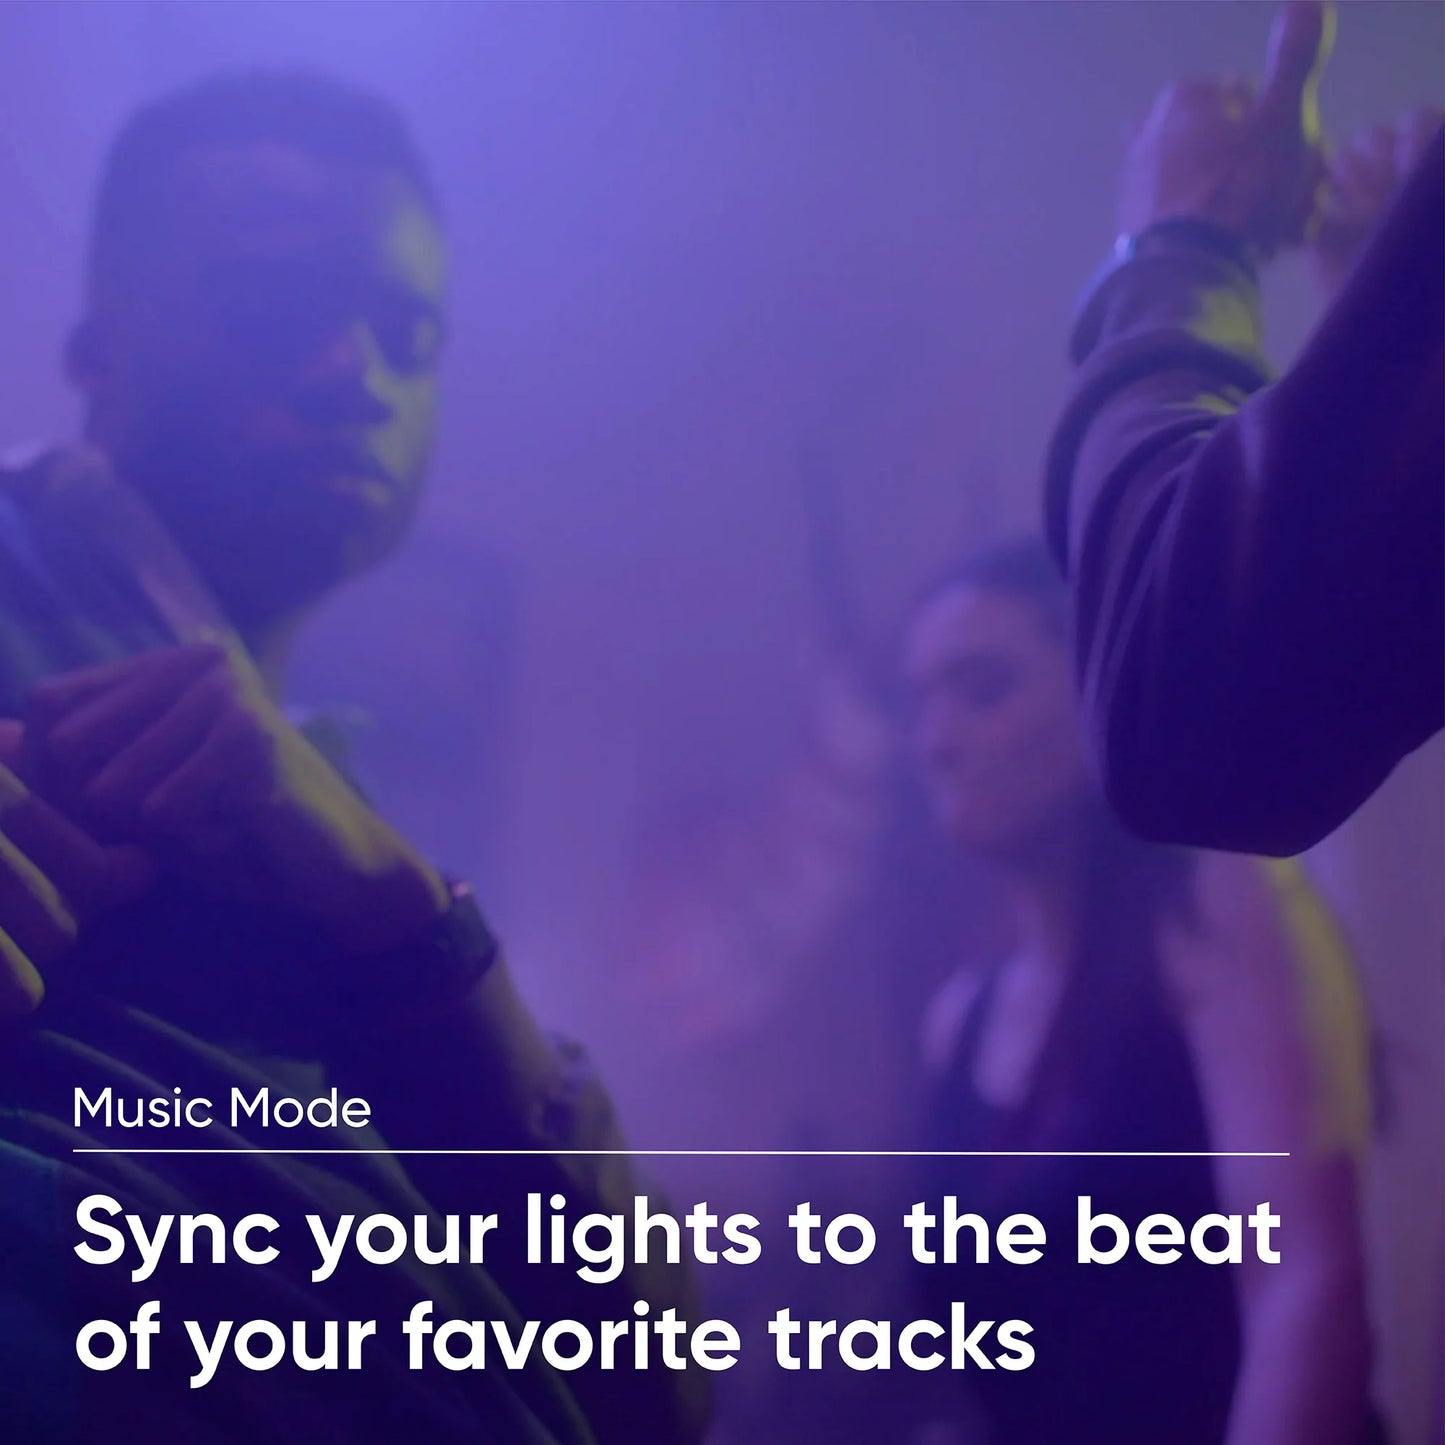 People dancing under the glow of purple lights. Text overlay that says "Music Mode."